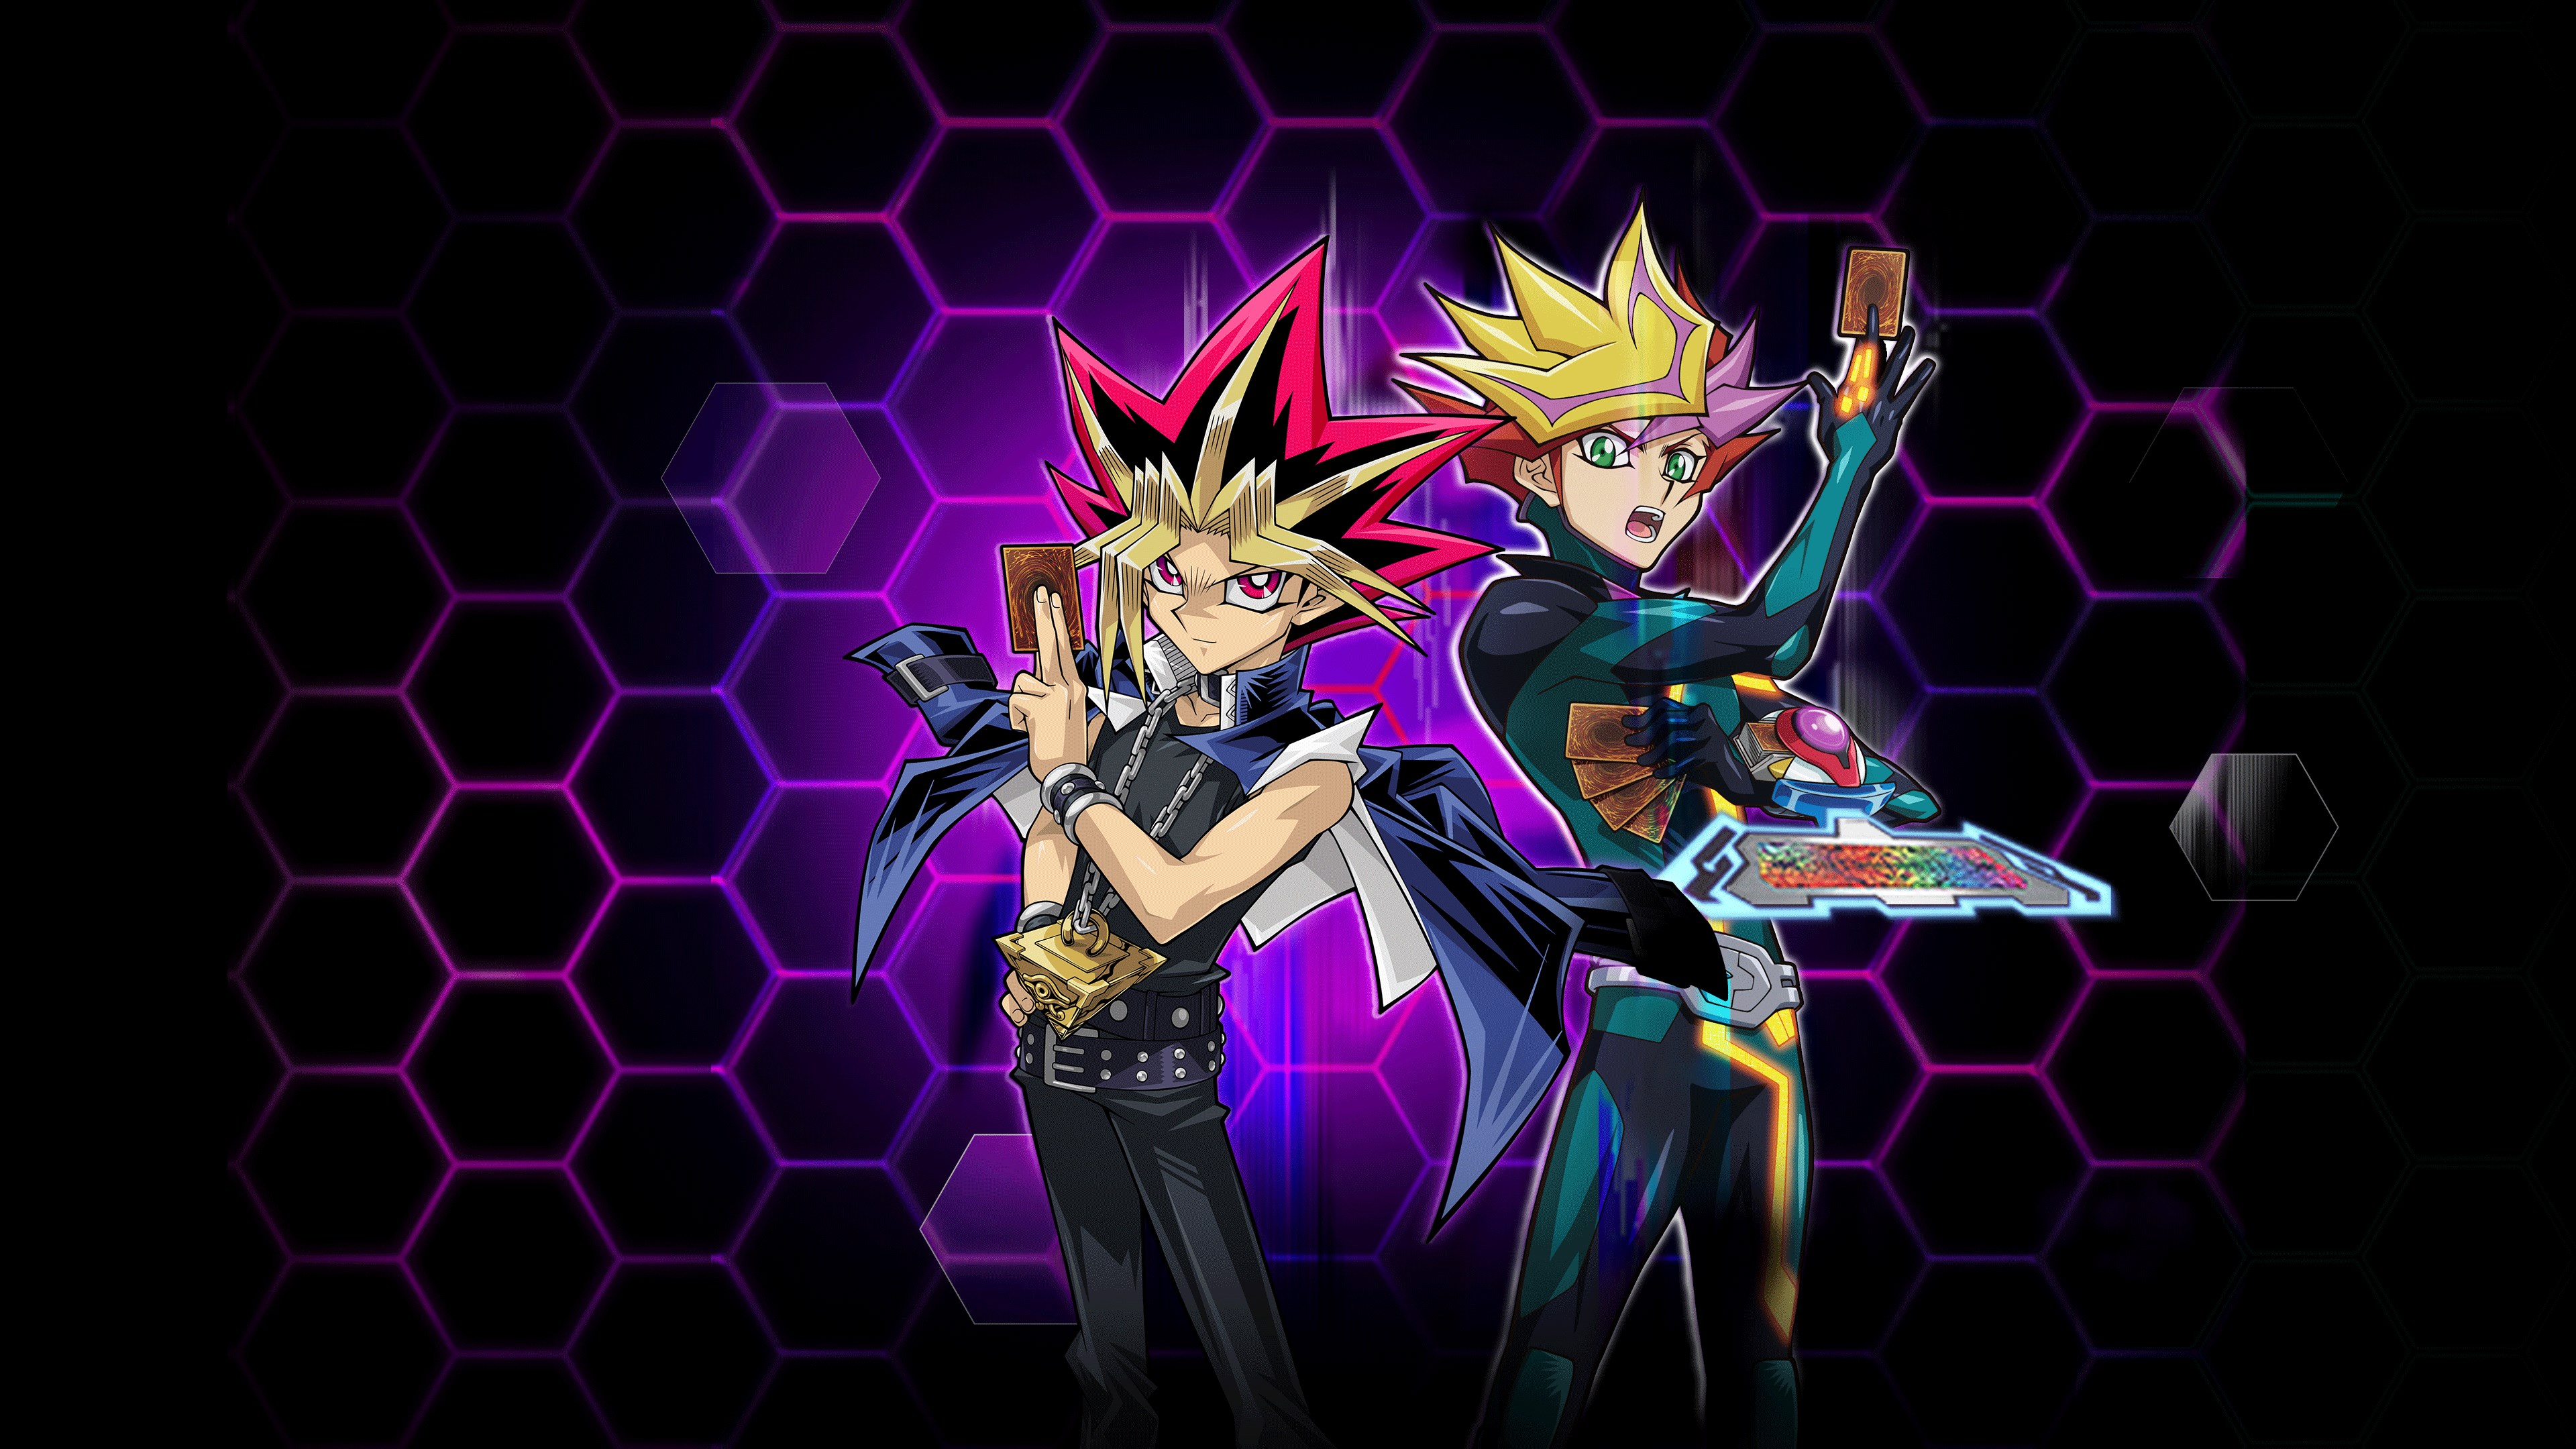 yugioh link evolution xbox one release date